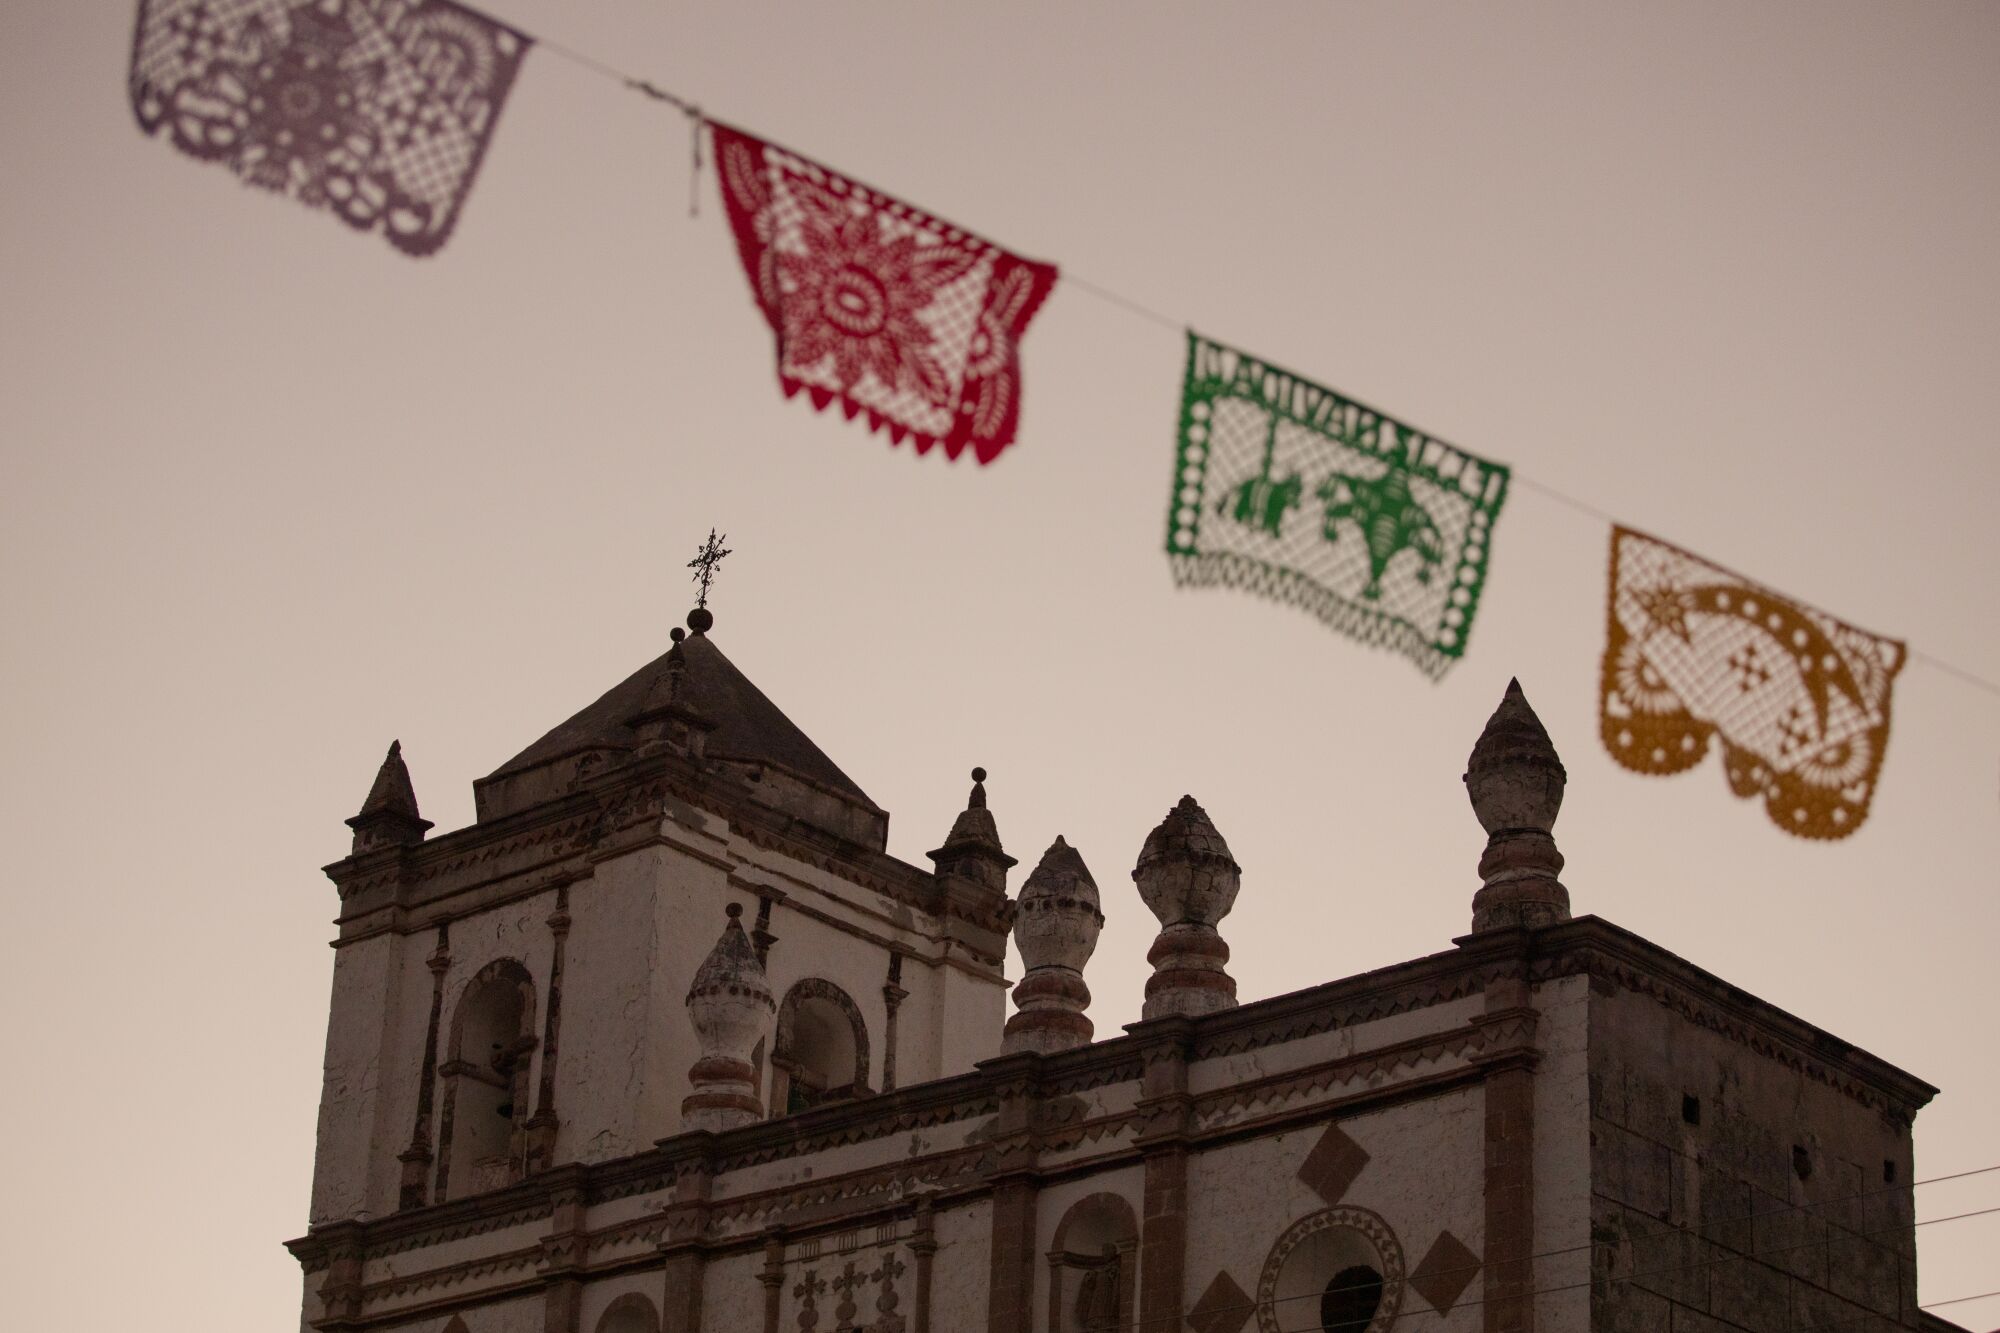 A low-angle view of an ornate church building, with a banner of colorful flags in the foreground.